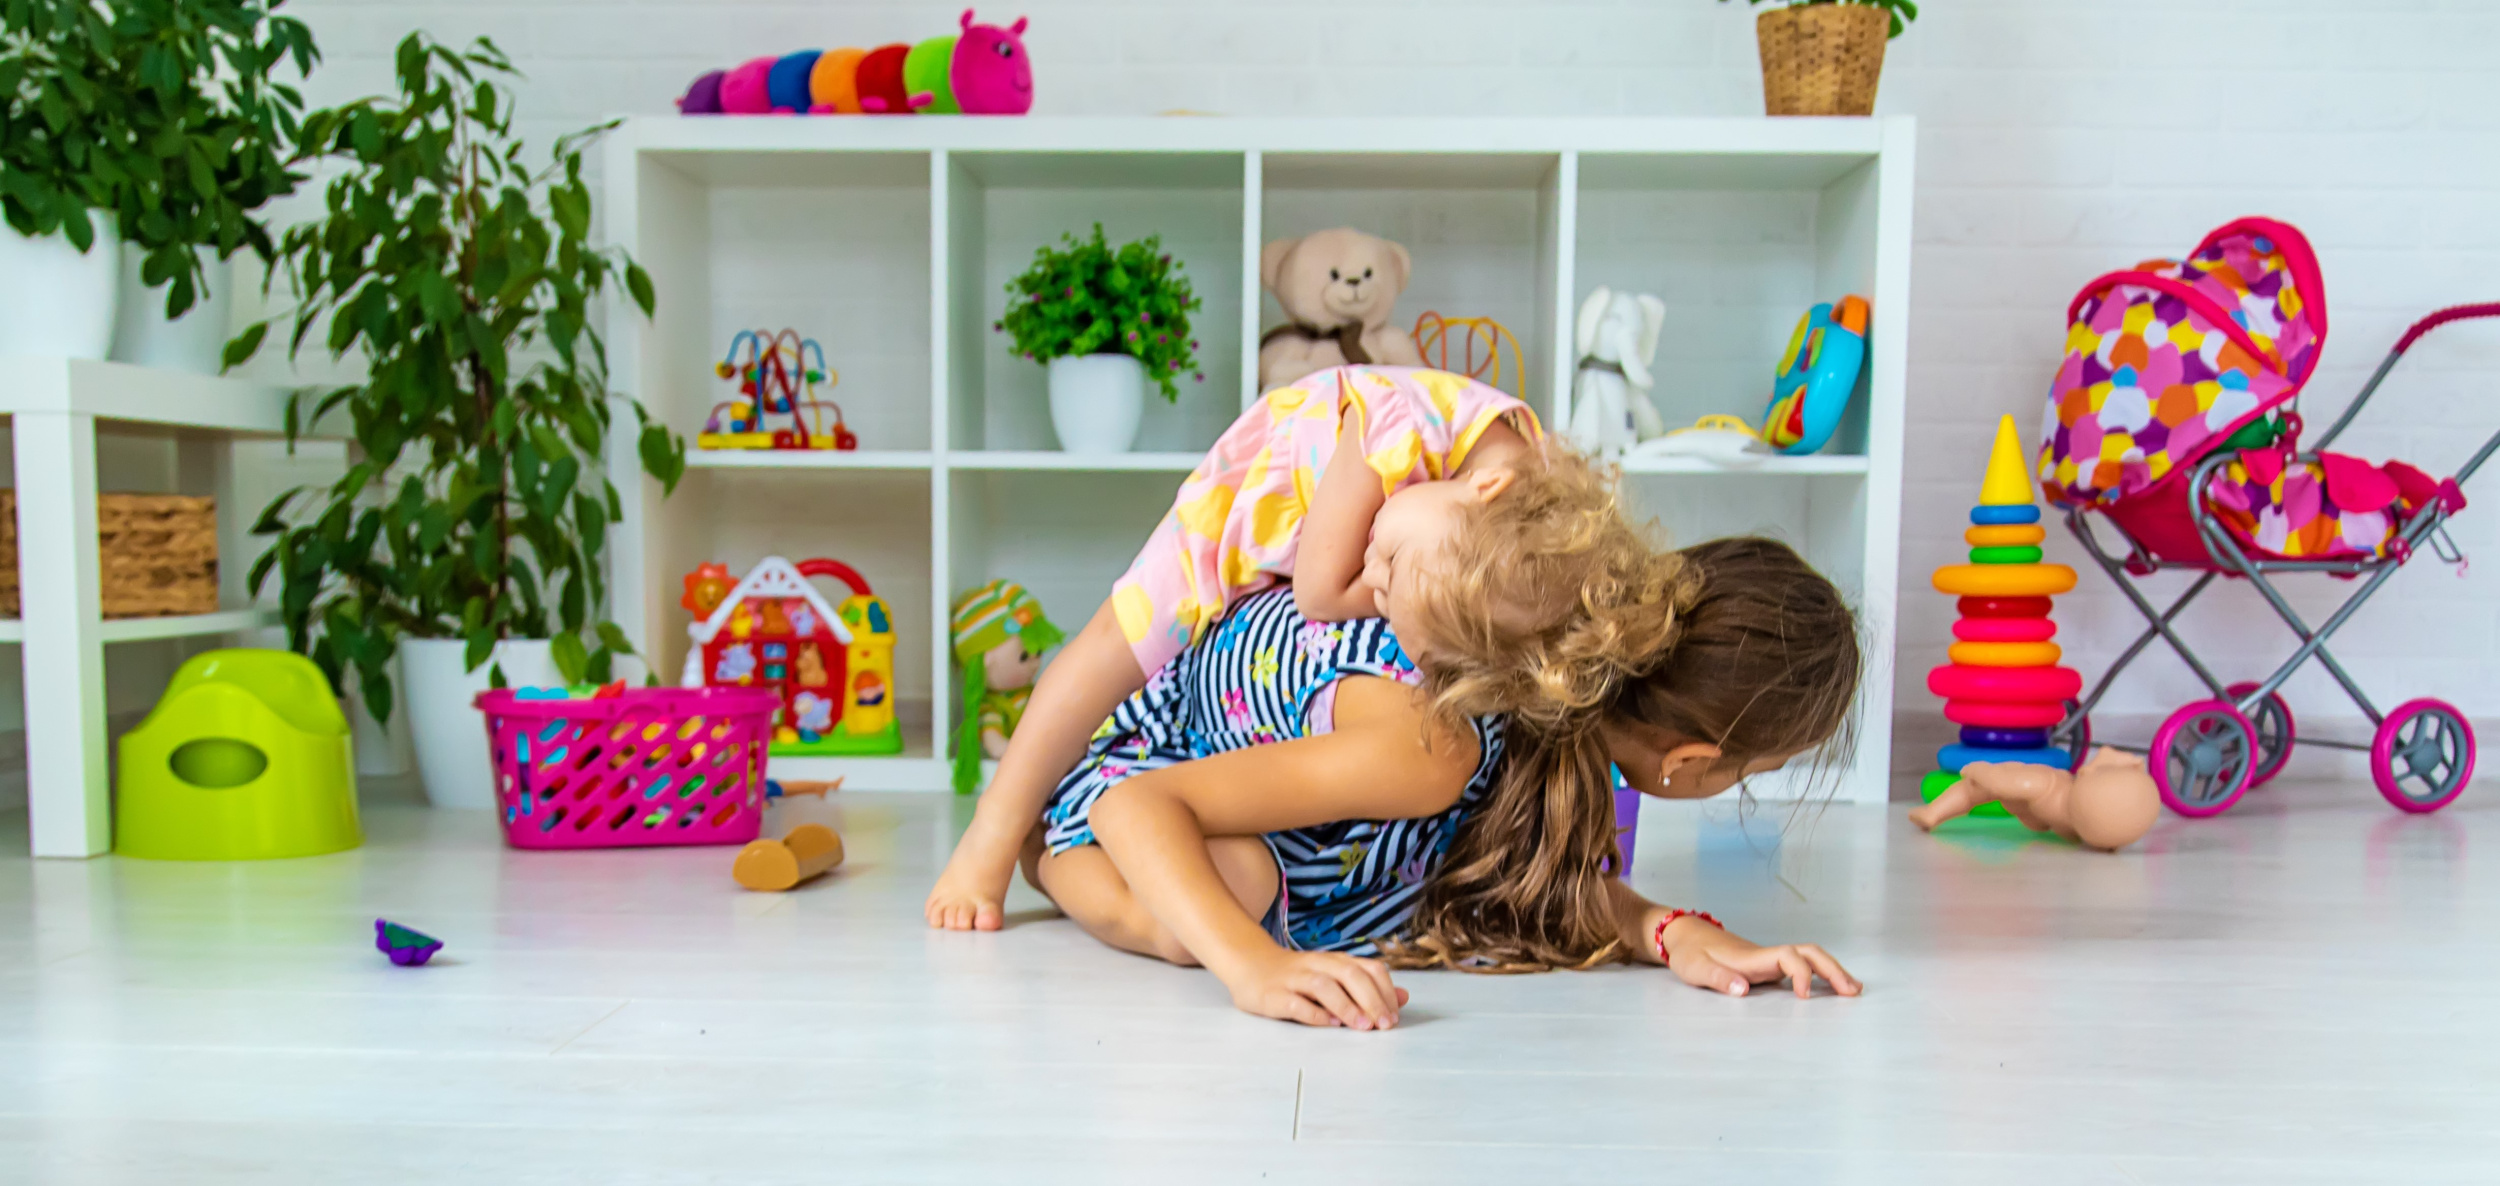 1 children-play-together-in-the-room-selective-focus.jpg